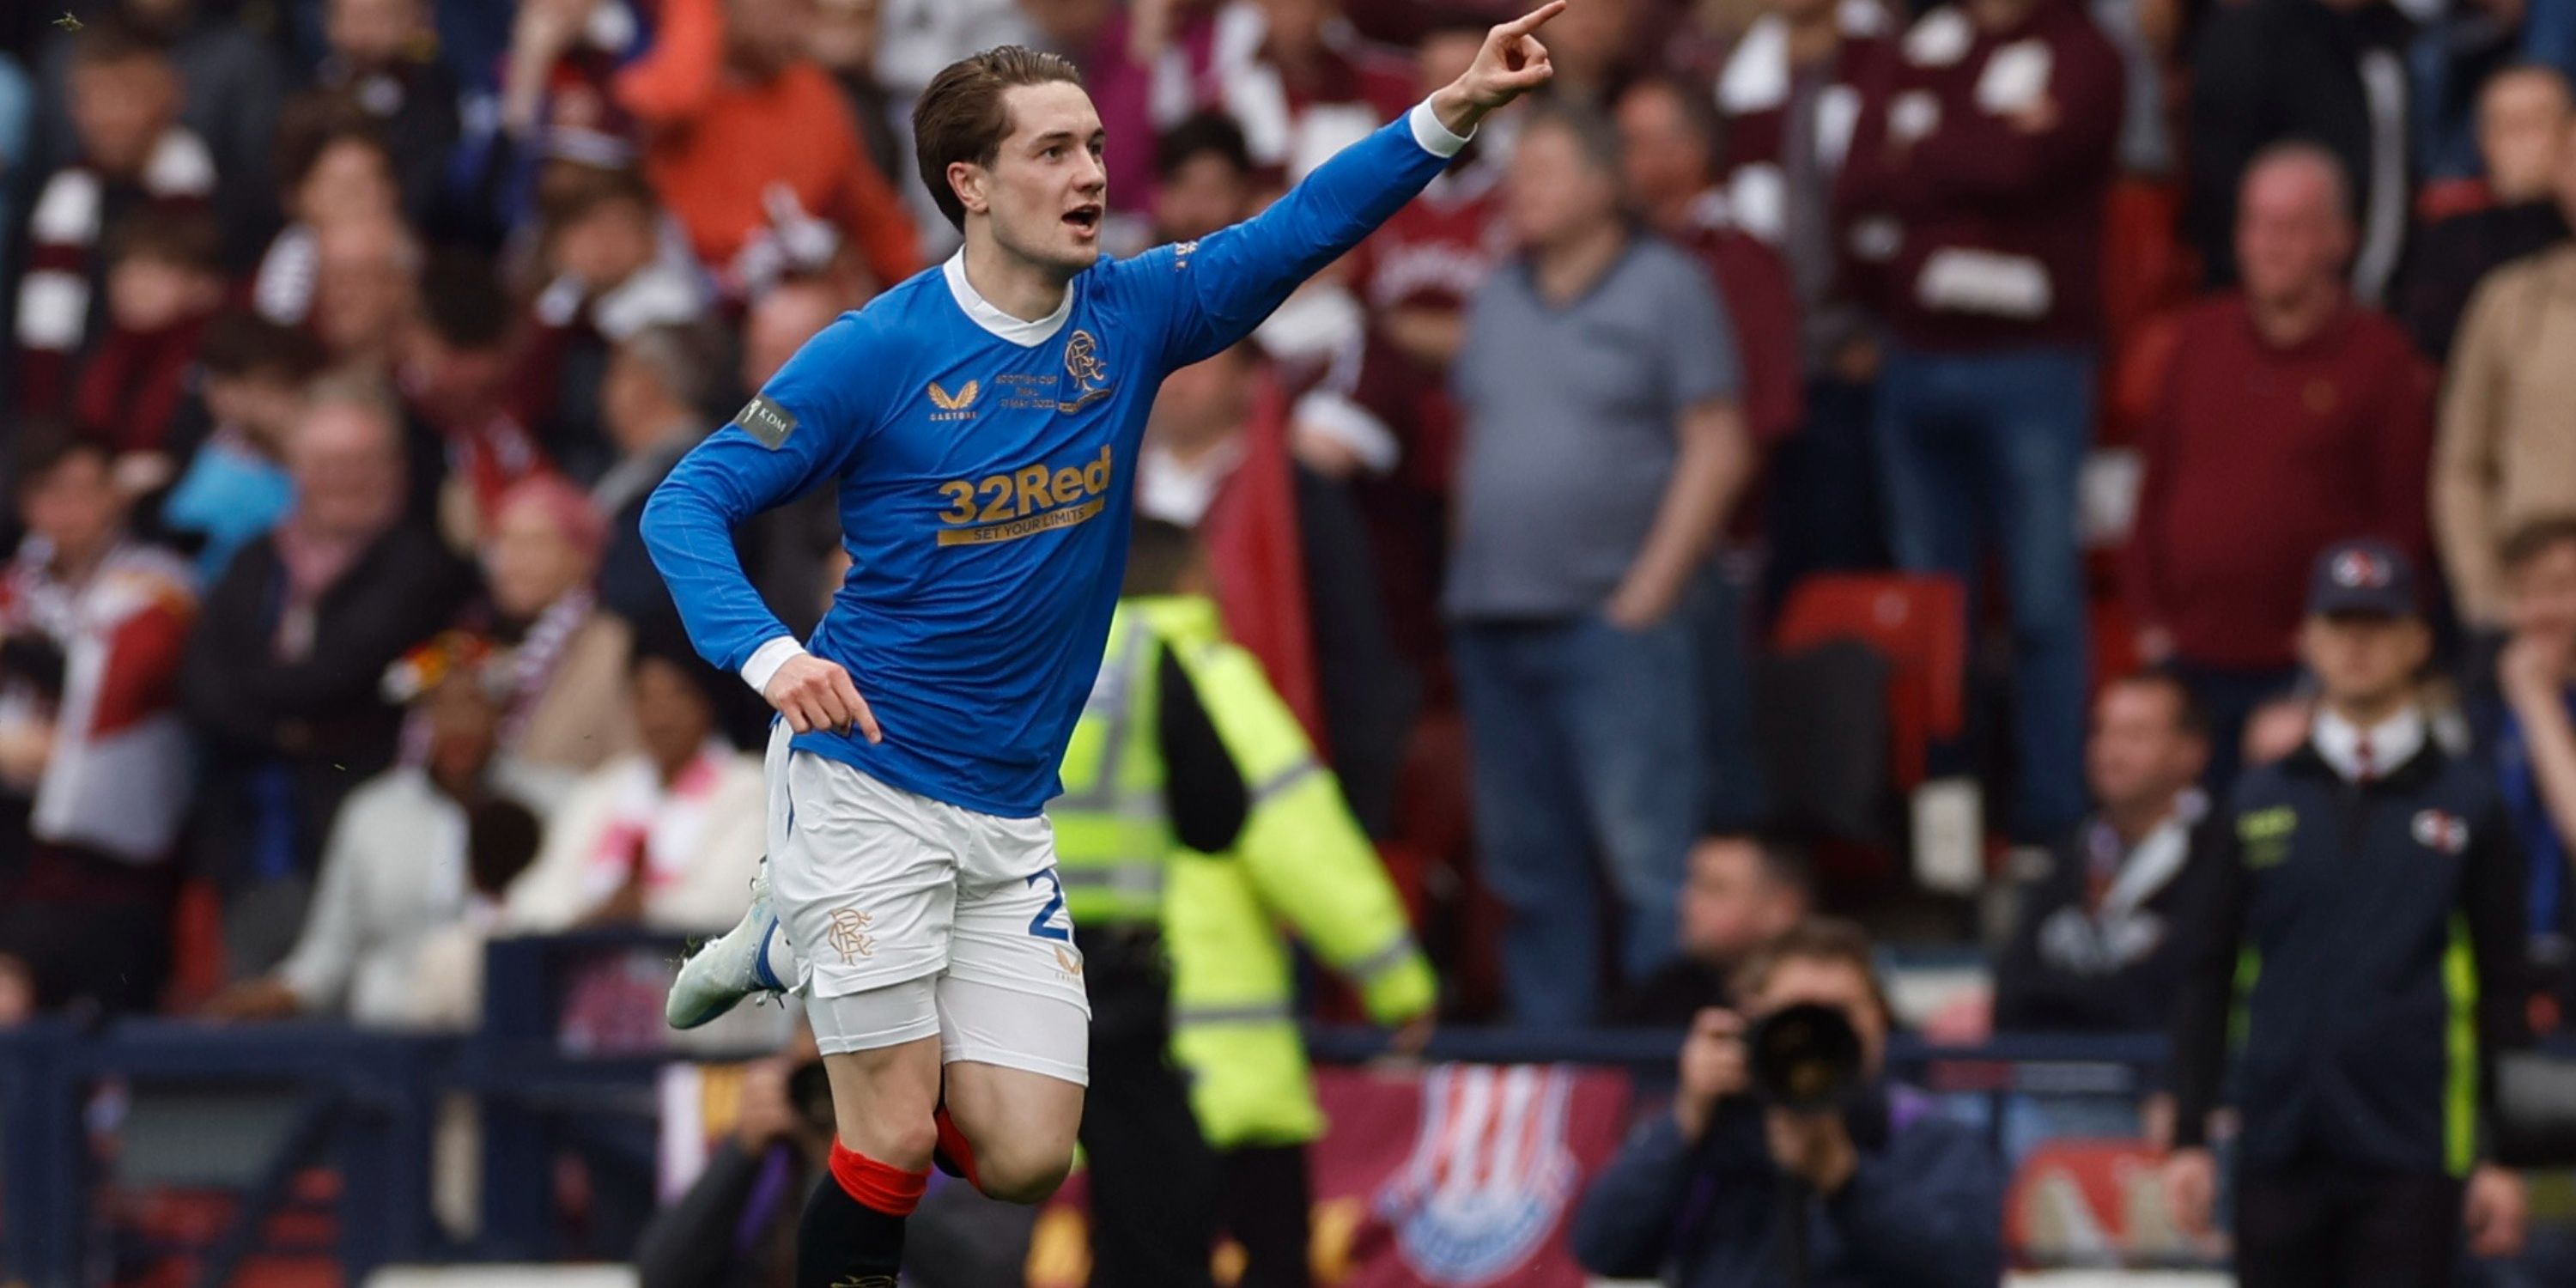 rangers join race to sign £14m star, ibrox chiefs wowed by his quick feet